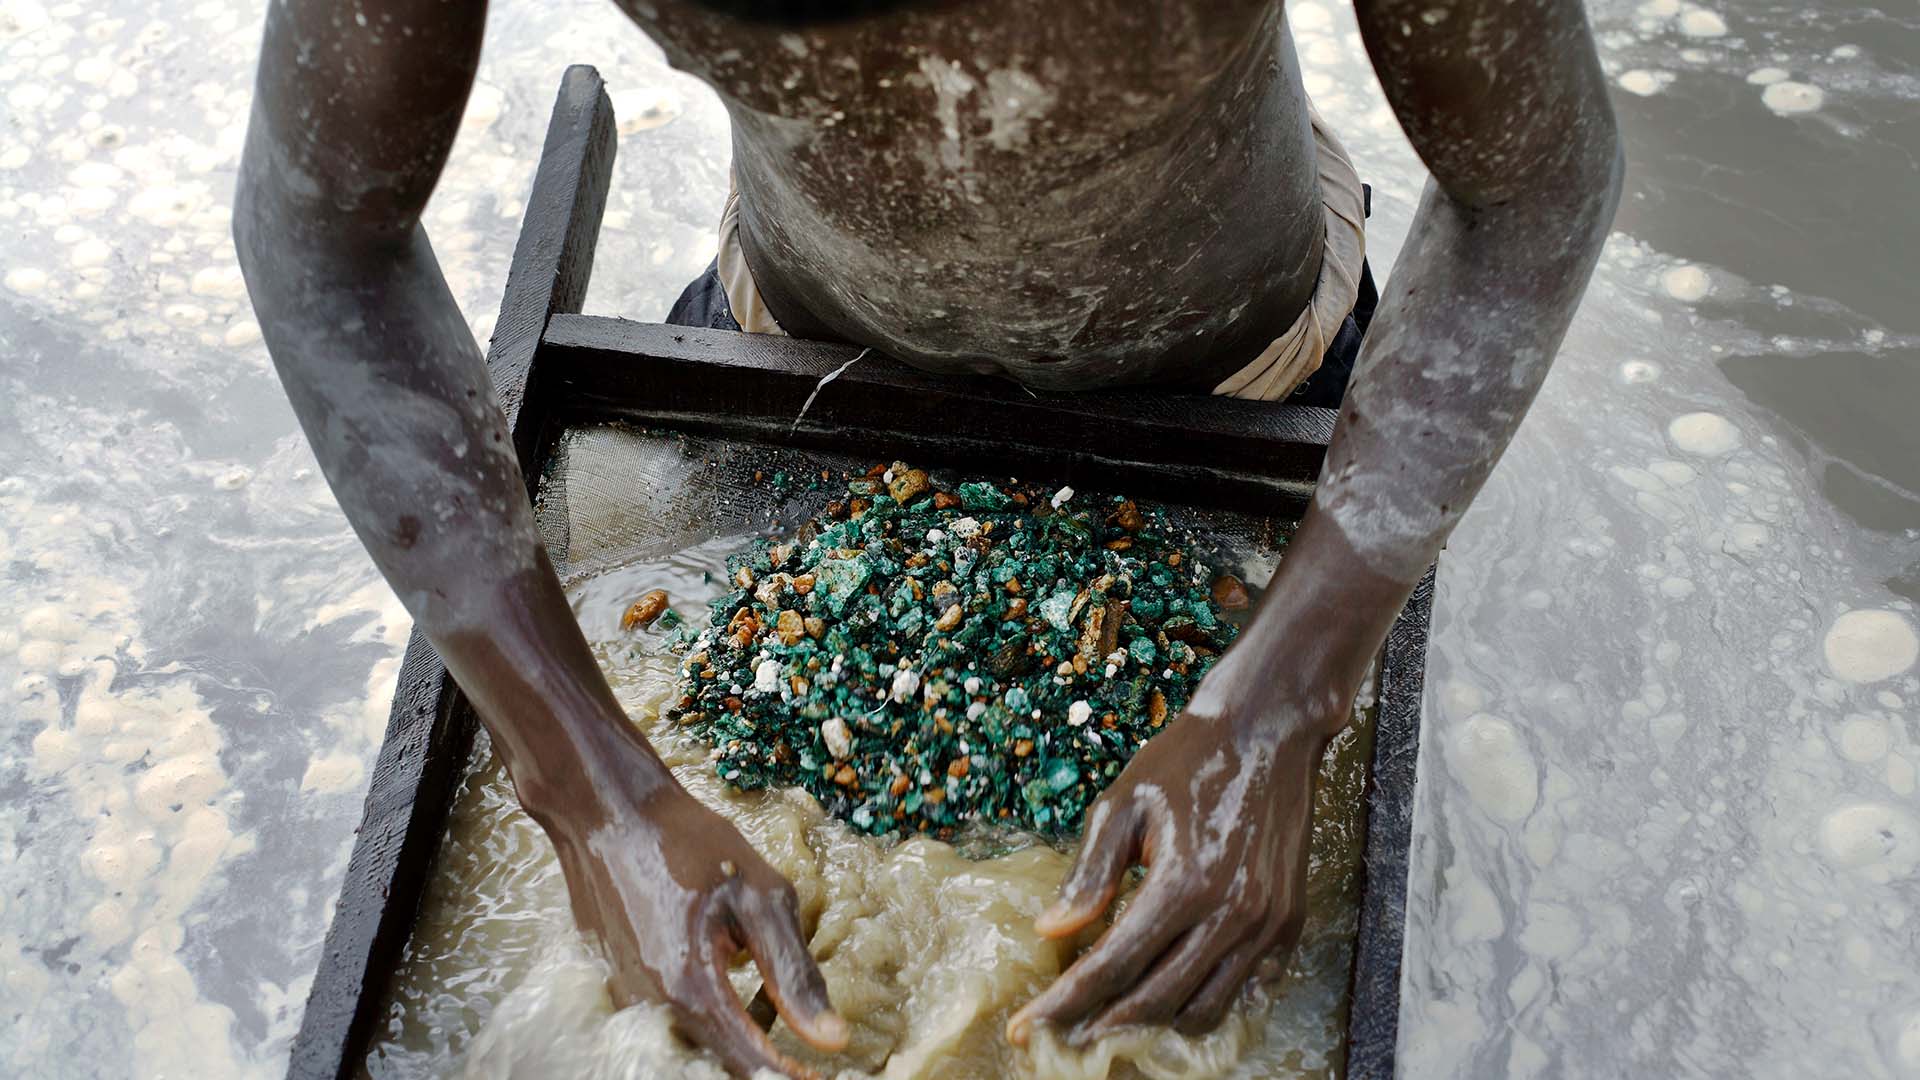  Conflict Minerals: laundered by due diligence schemes?